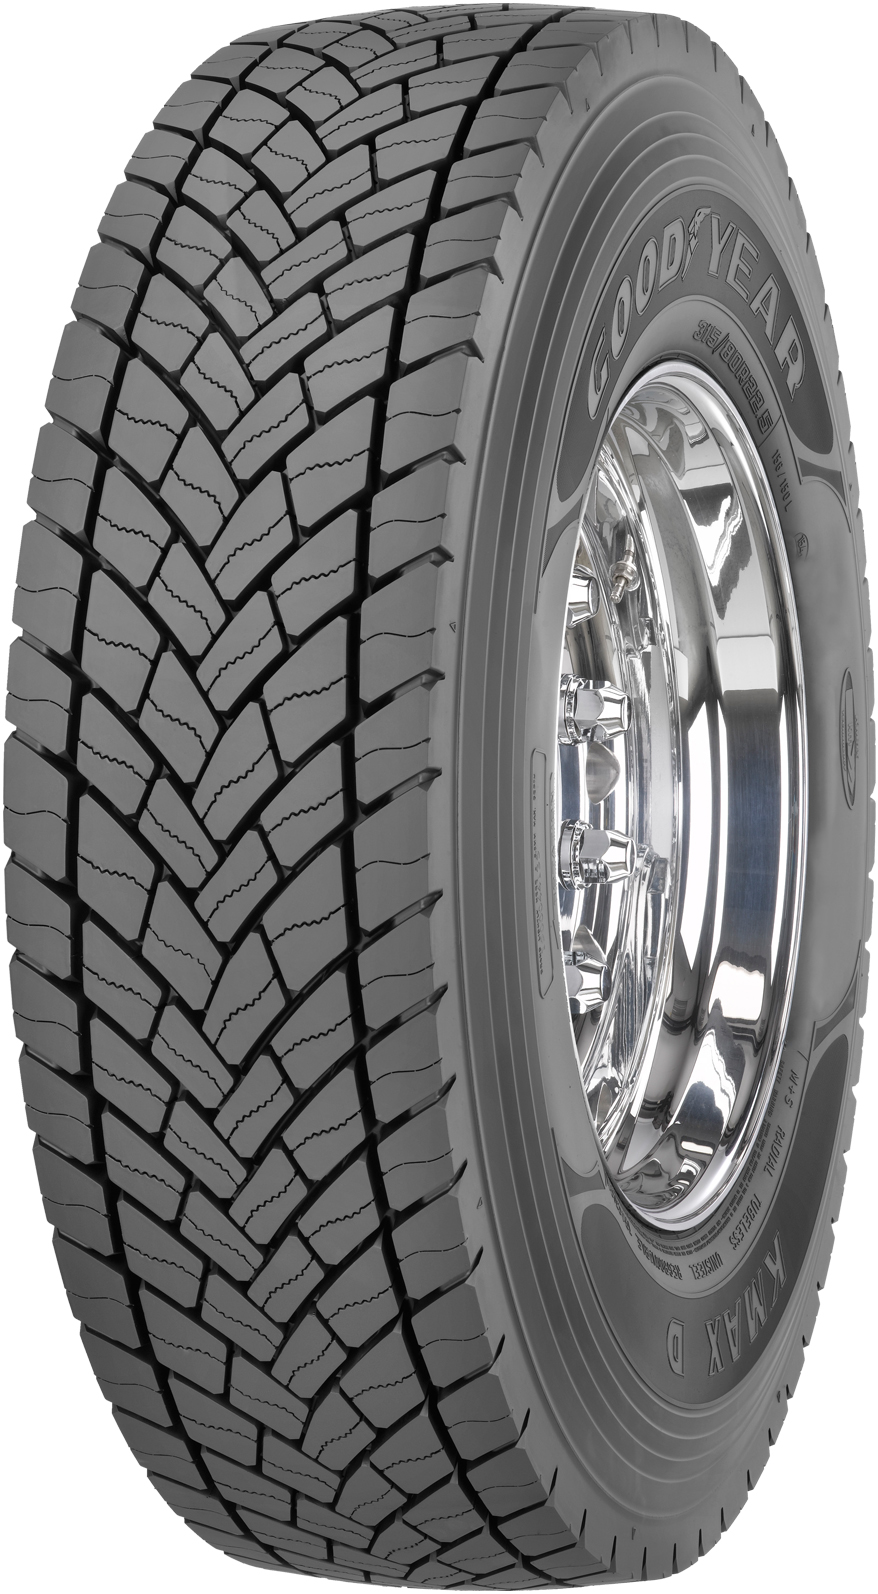 product_type-heavy_tires GOODYEAR KMAX D 12 TL 215/75 R17.5 126M